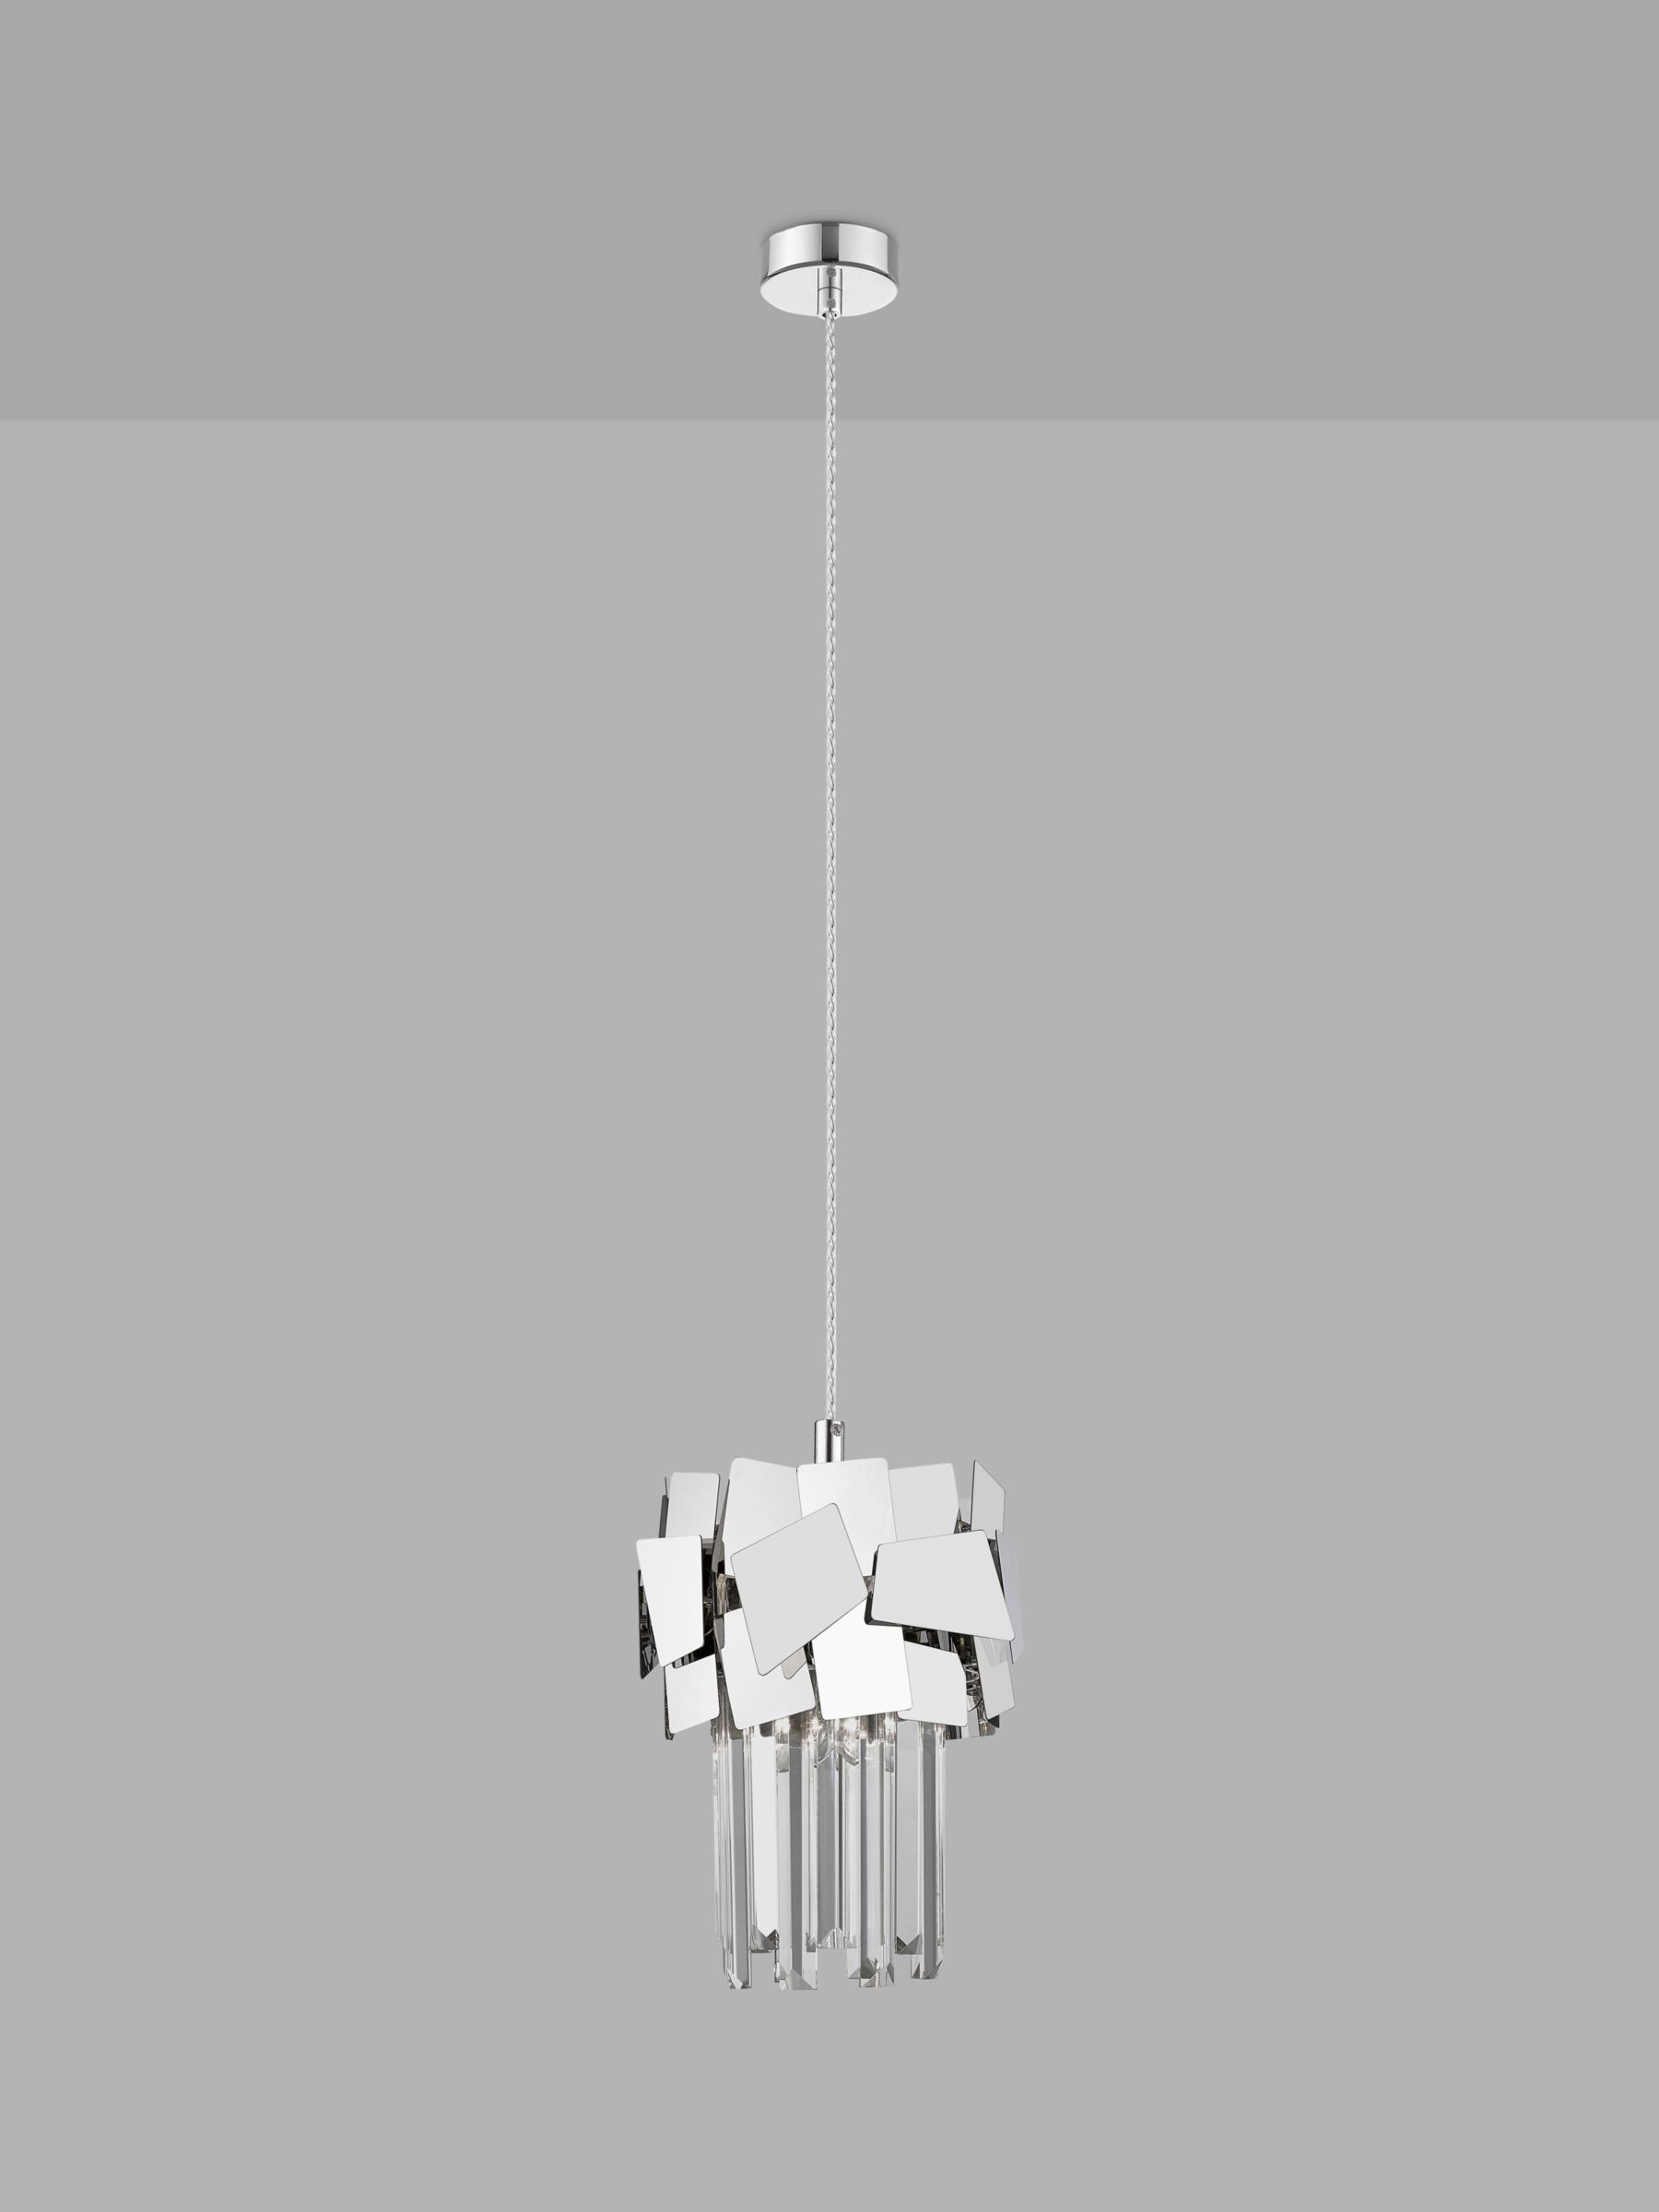 Photo of Impex celine crystal glass ceiling light